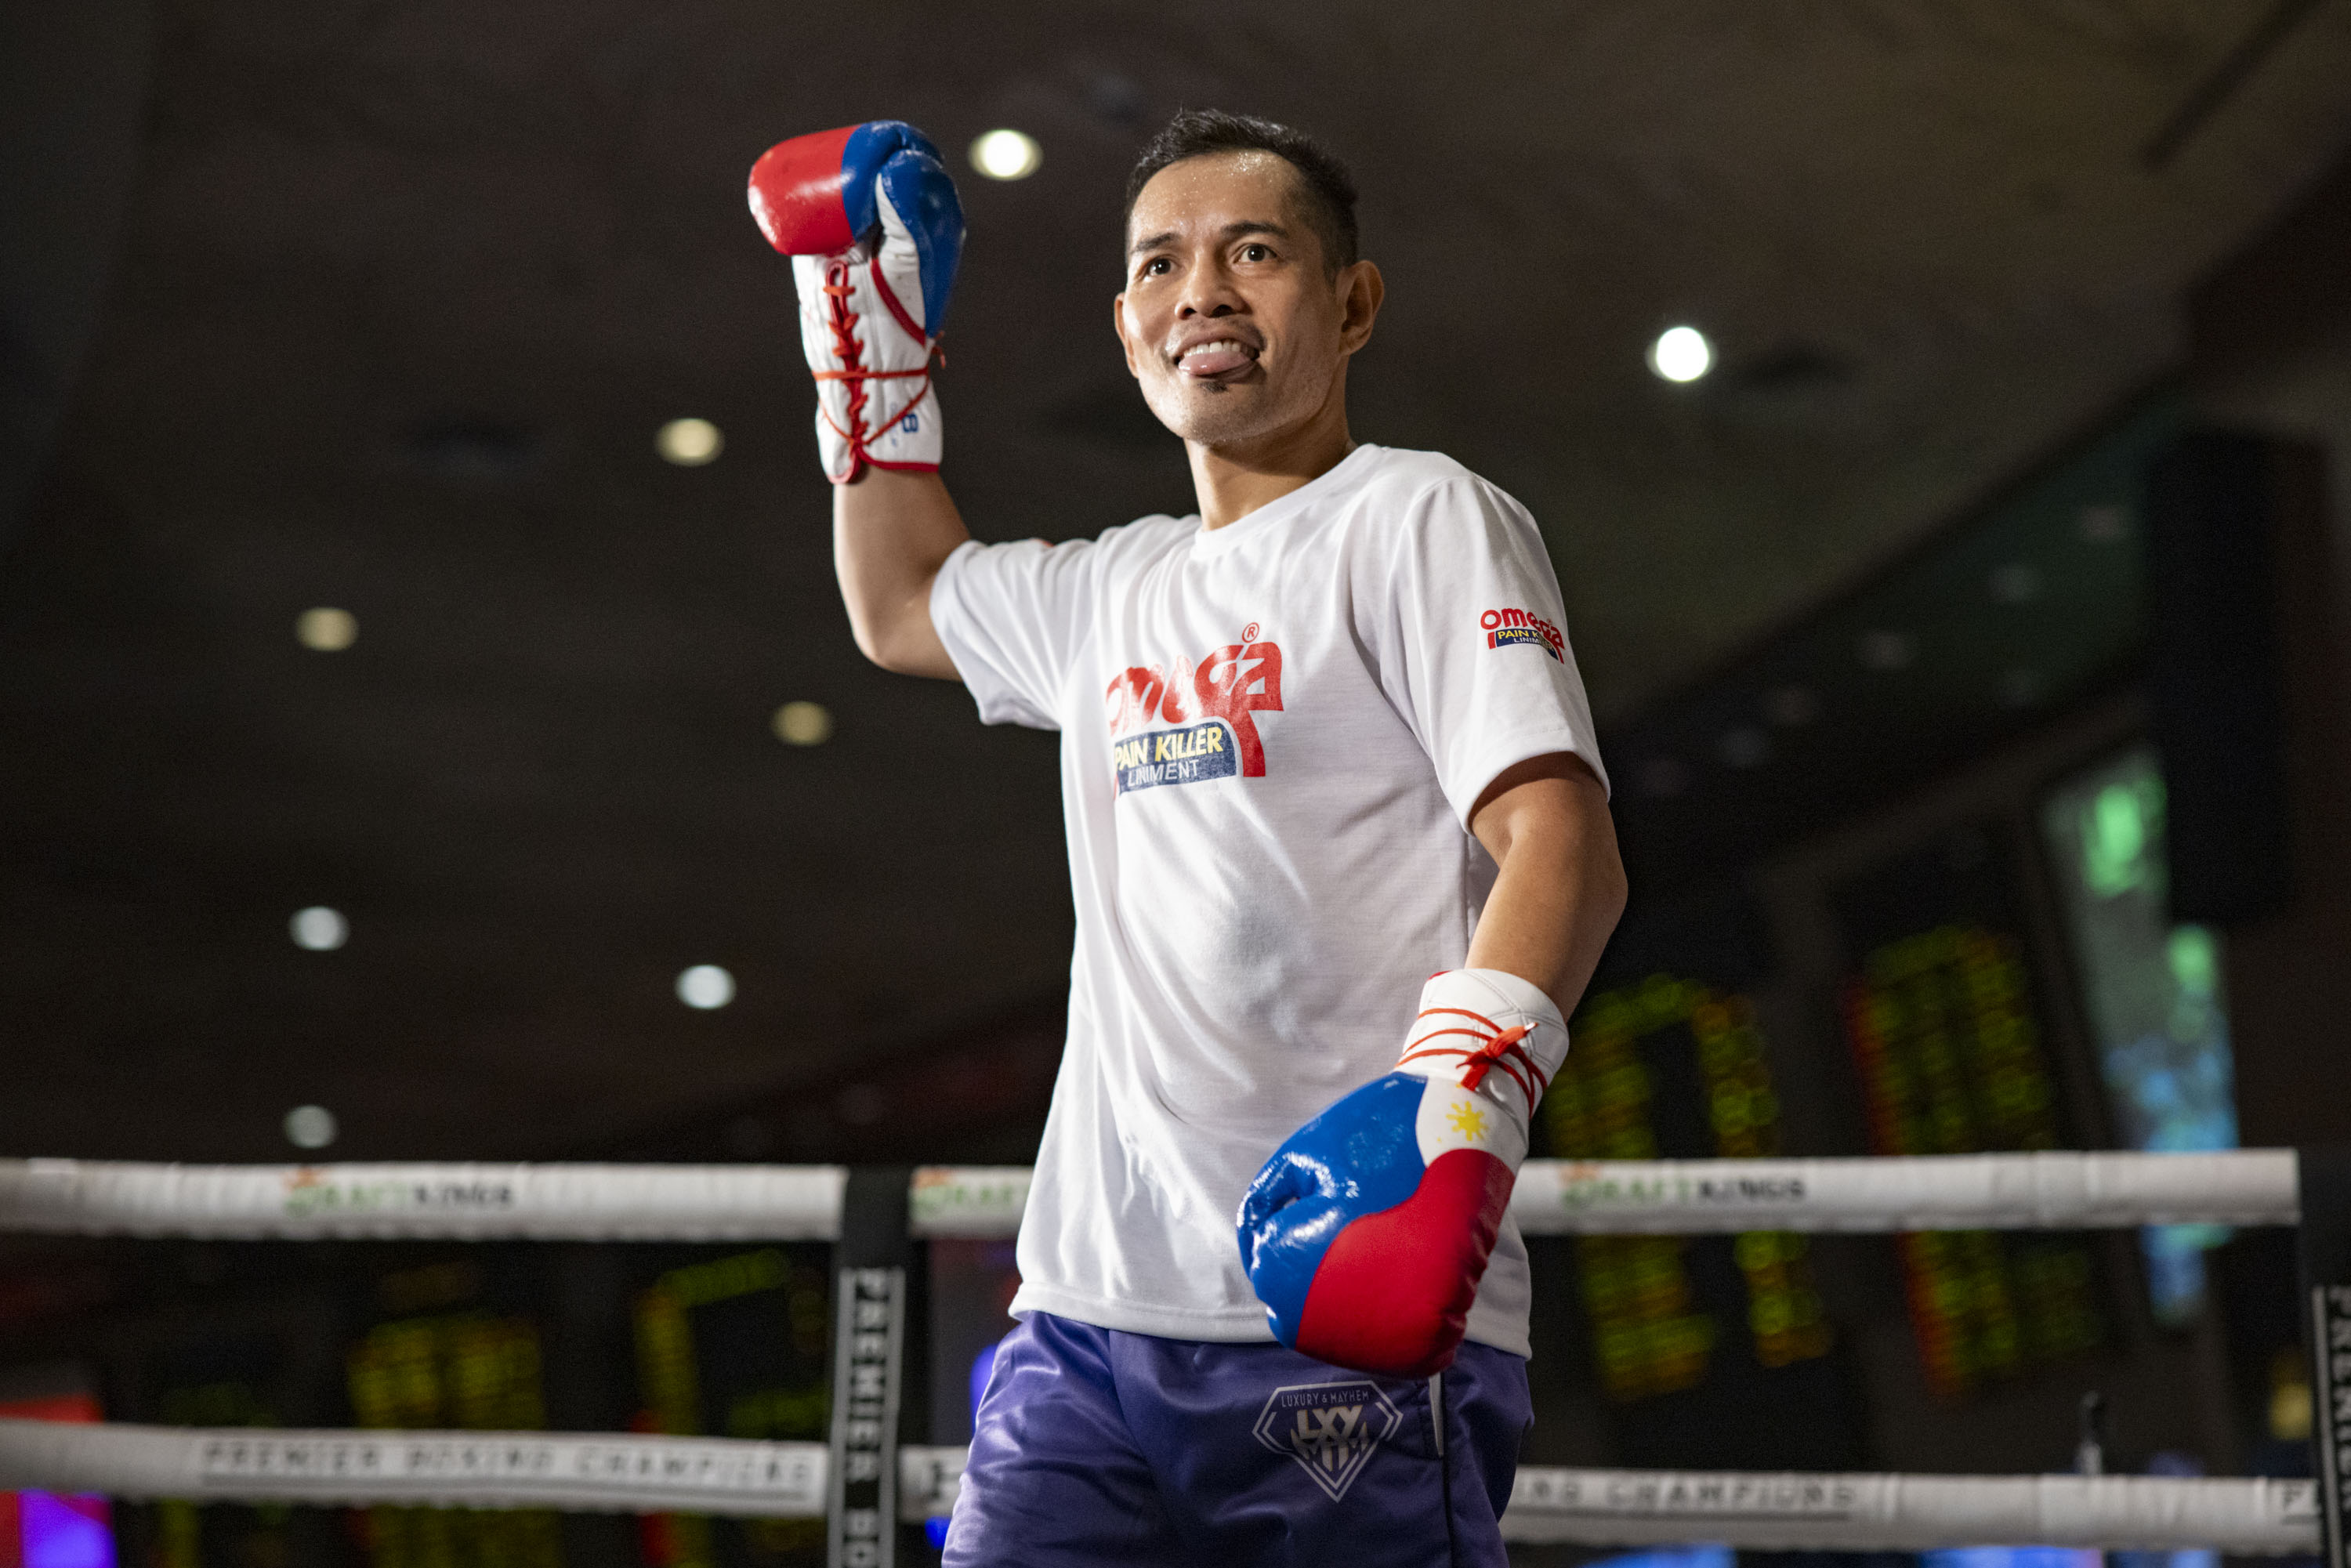 Donaire praises Inoue’s toughness but says the pound-for-pound No.1 spot is far from settled